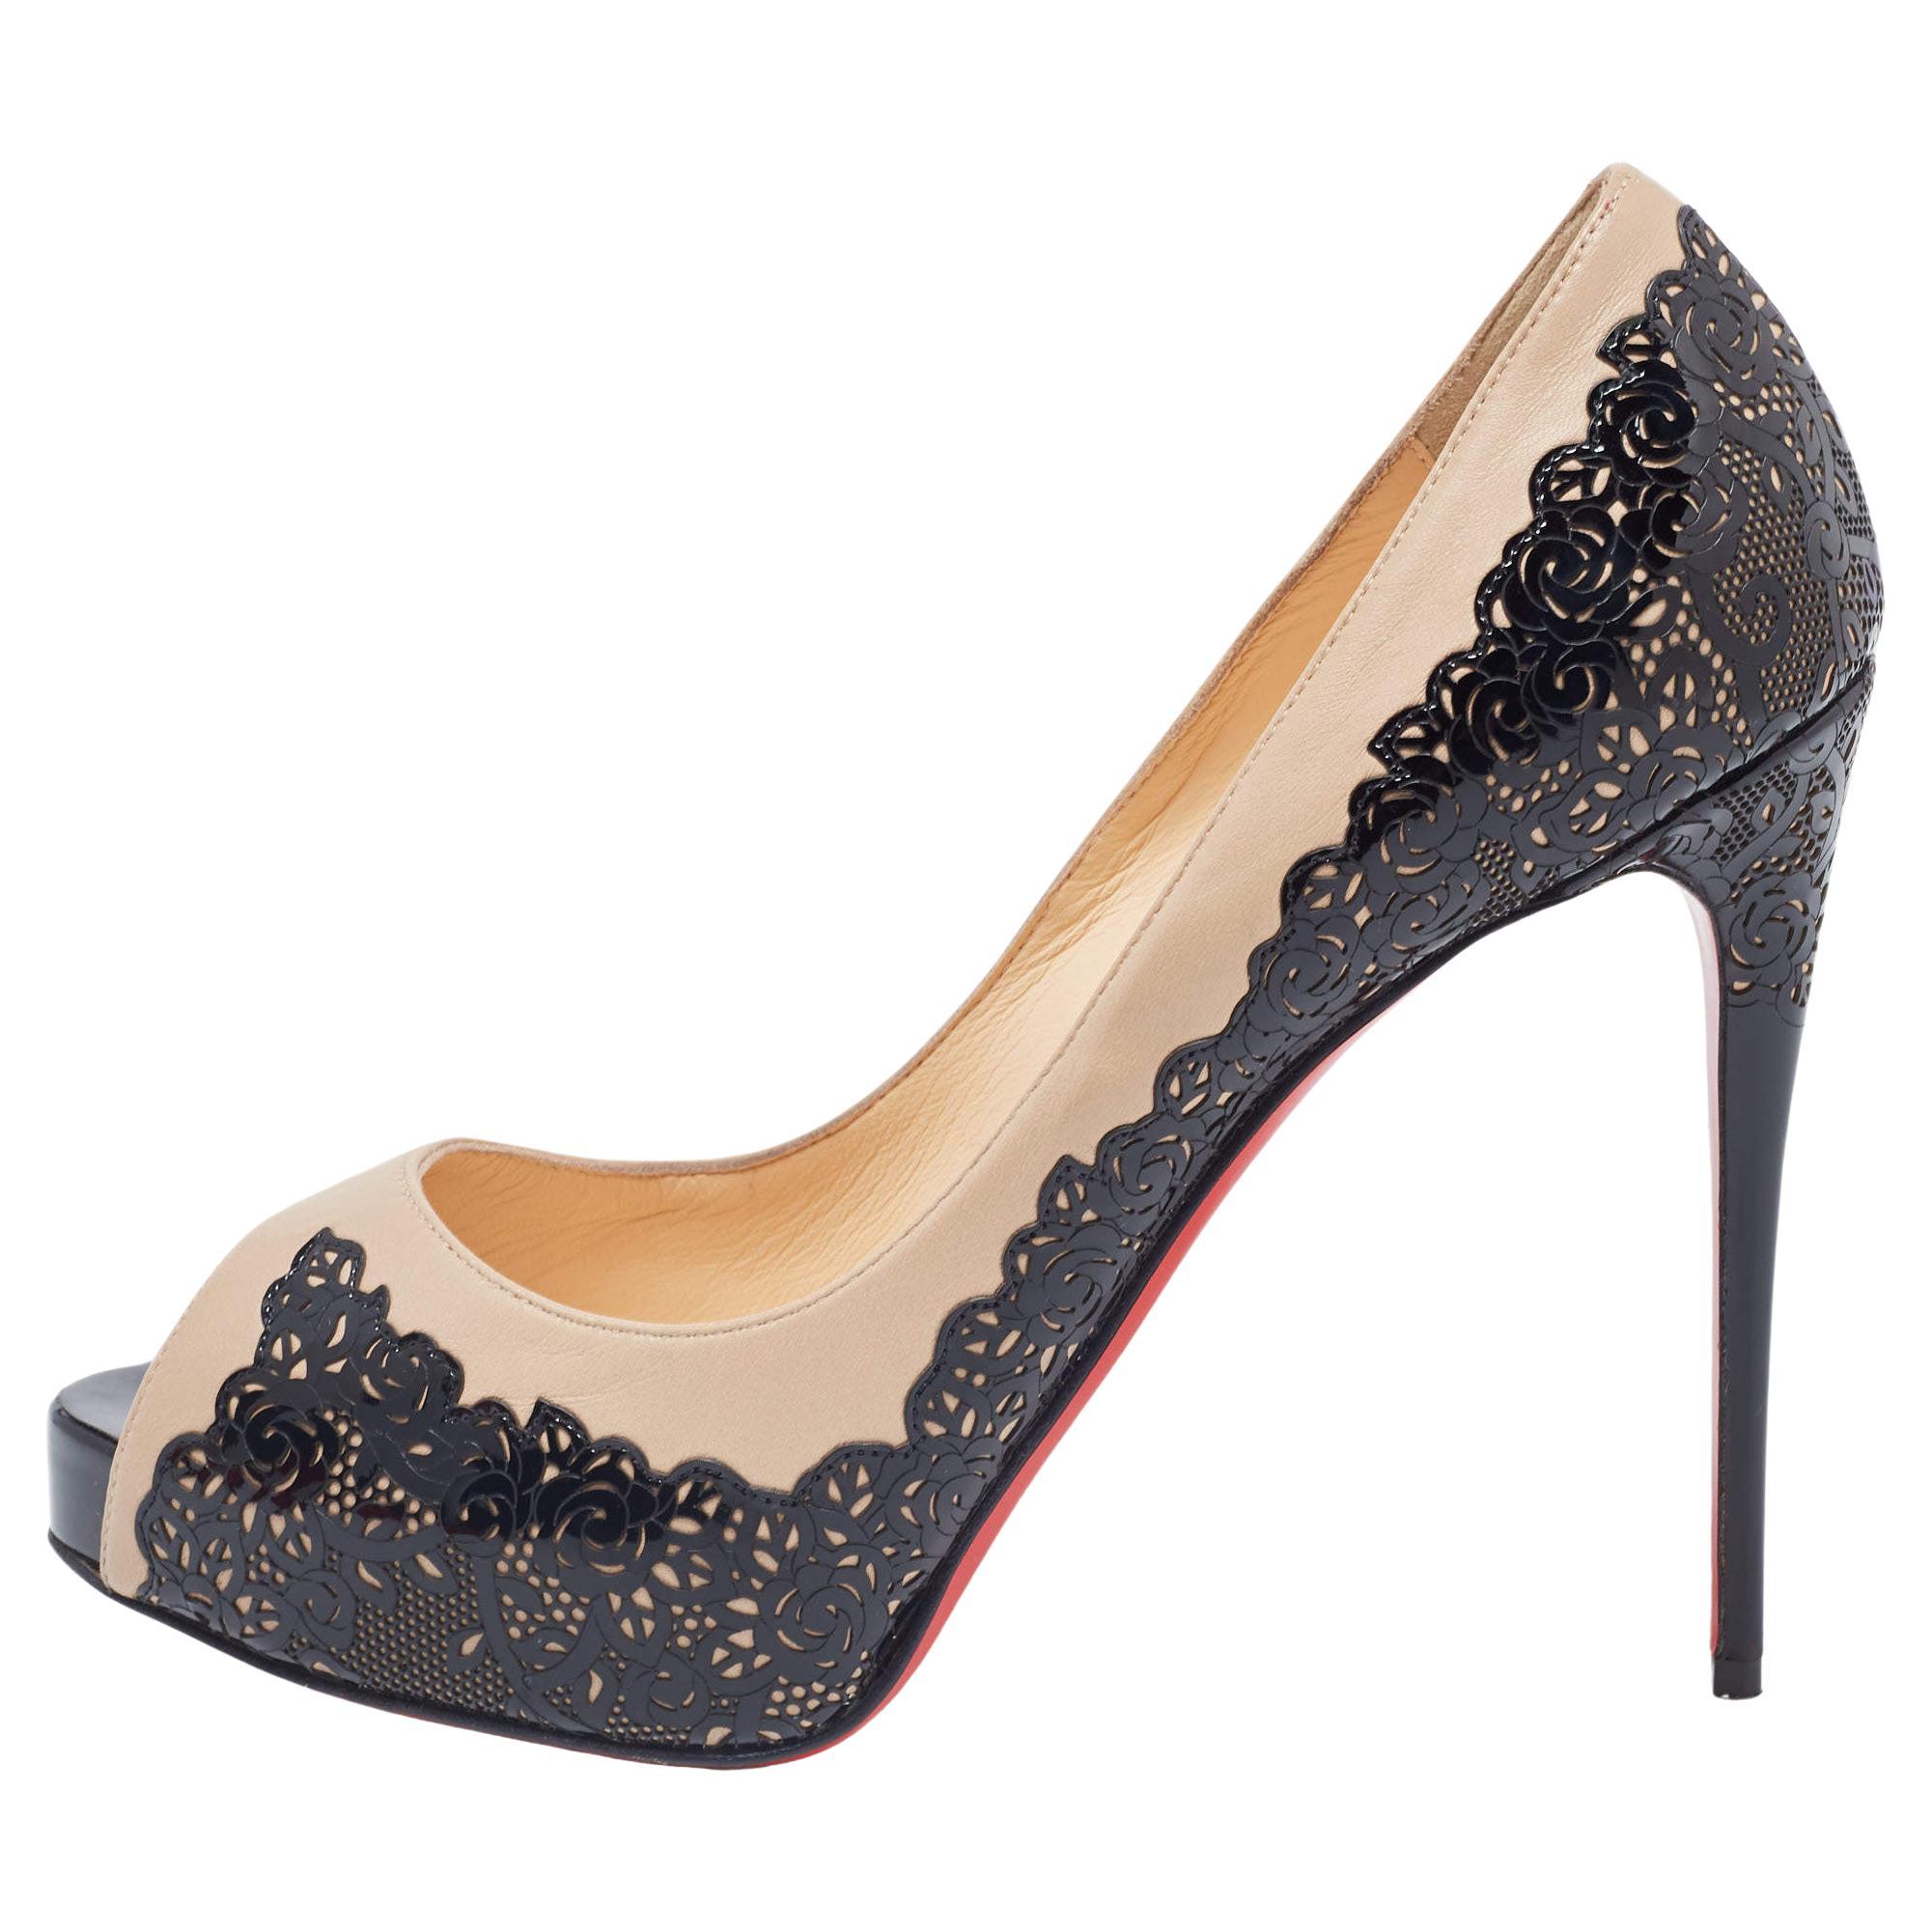 Christian Louboutin Laser Cut and Leather Veramucha Peep Toe Pumps Size 39 For Sale